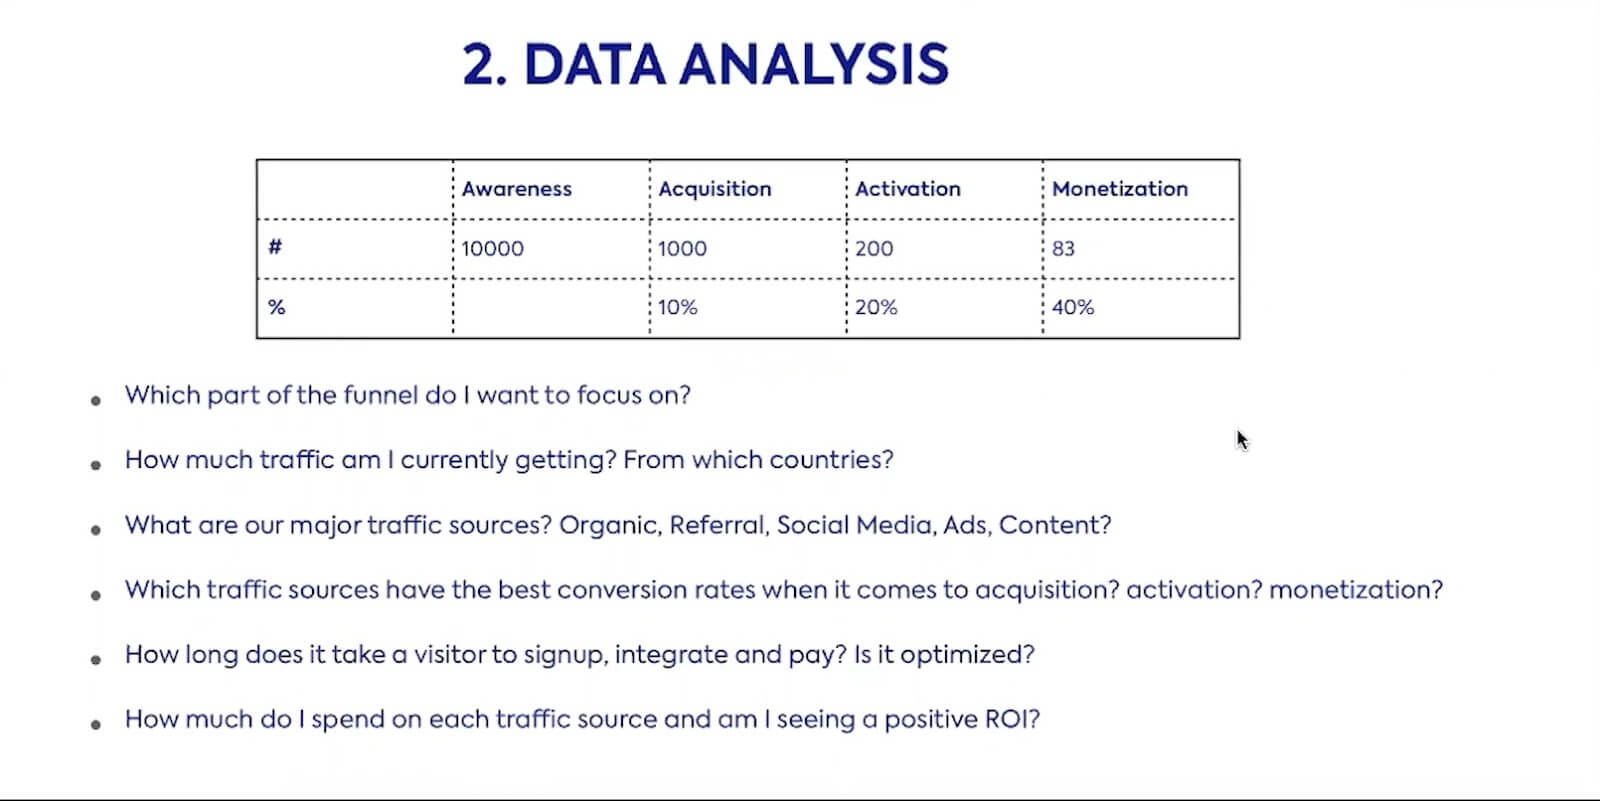 Data Analysis slide detailing the questions below. 